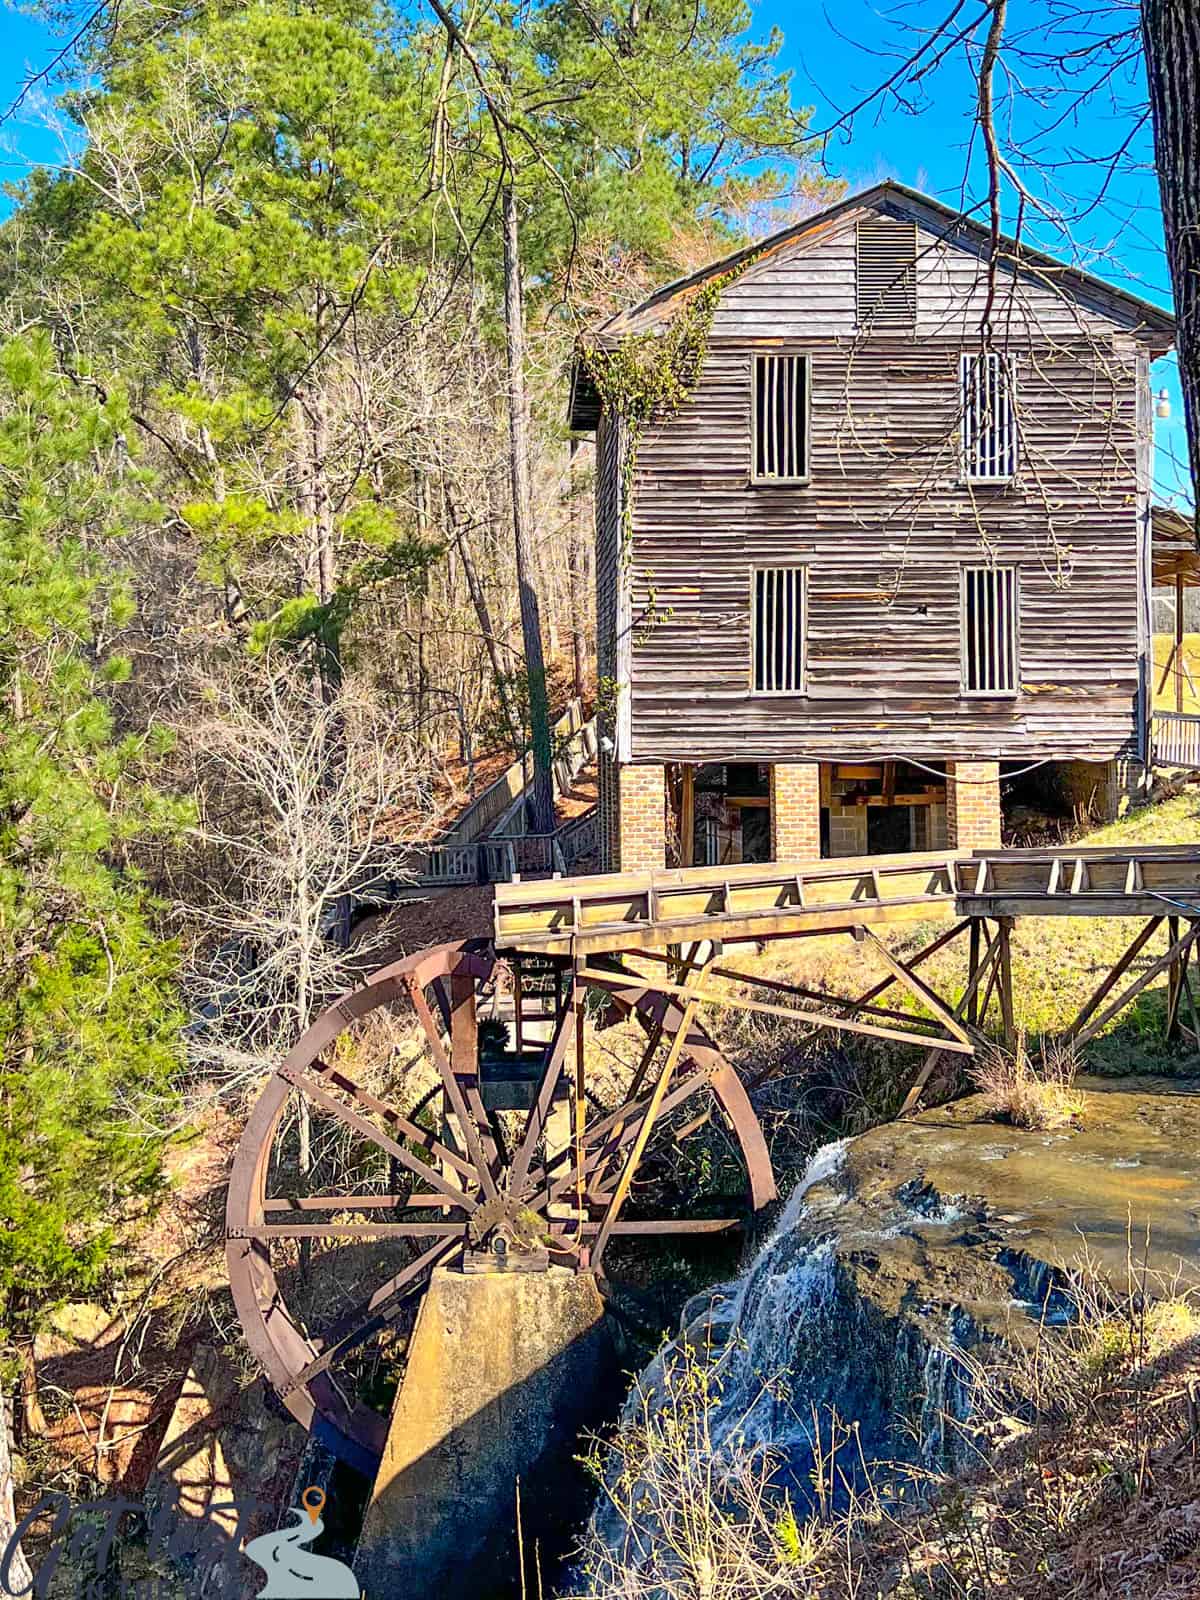 grist mill at Dunn's Falls